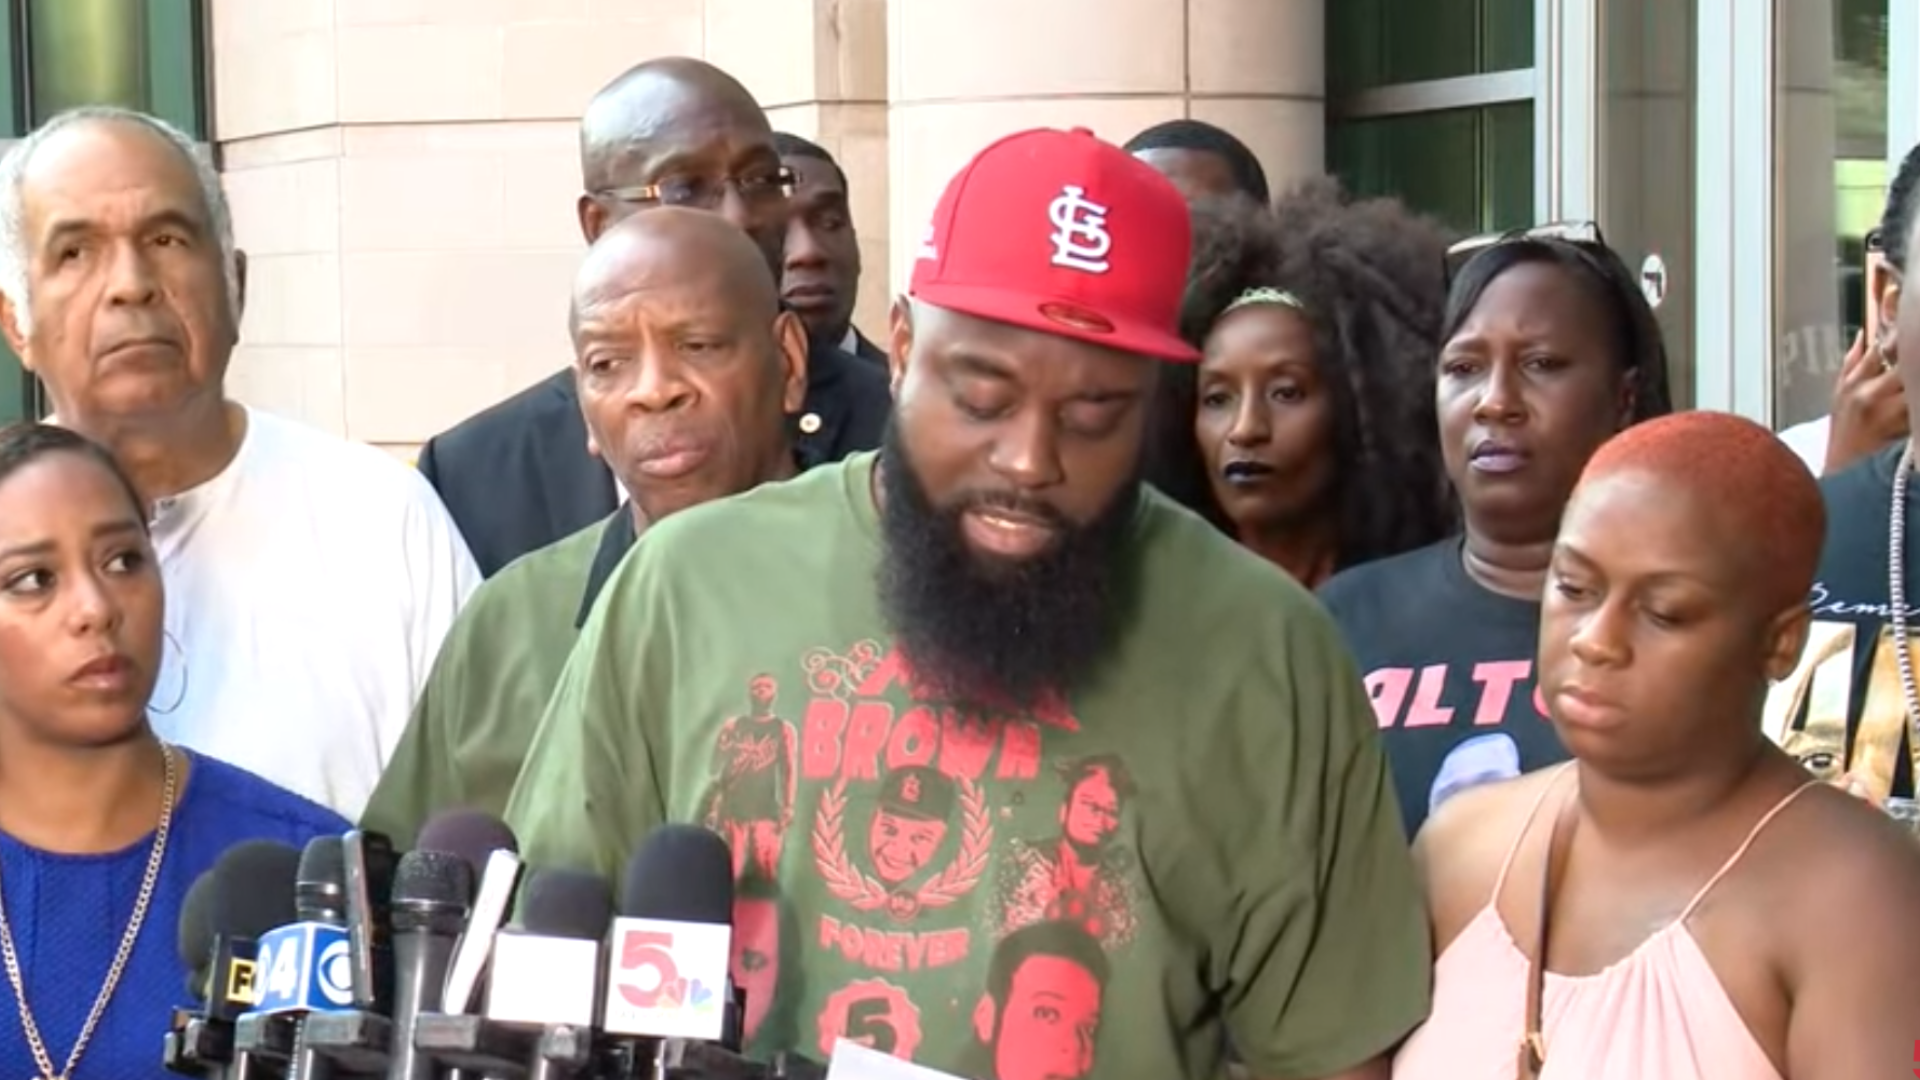 Michael Brown Sr. held a press conference at the St. Louis County Justice Center to call for the opening of the investigation into his son’s death.